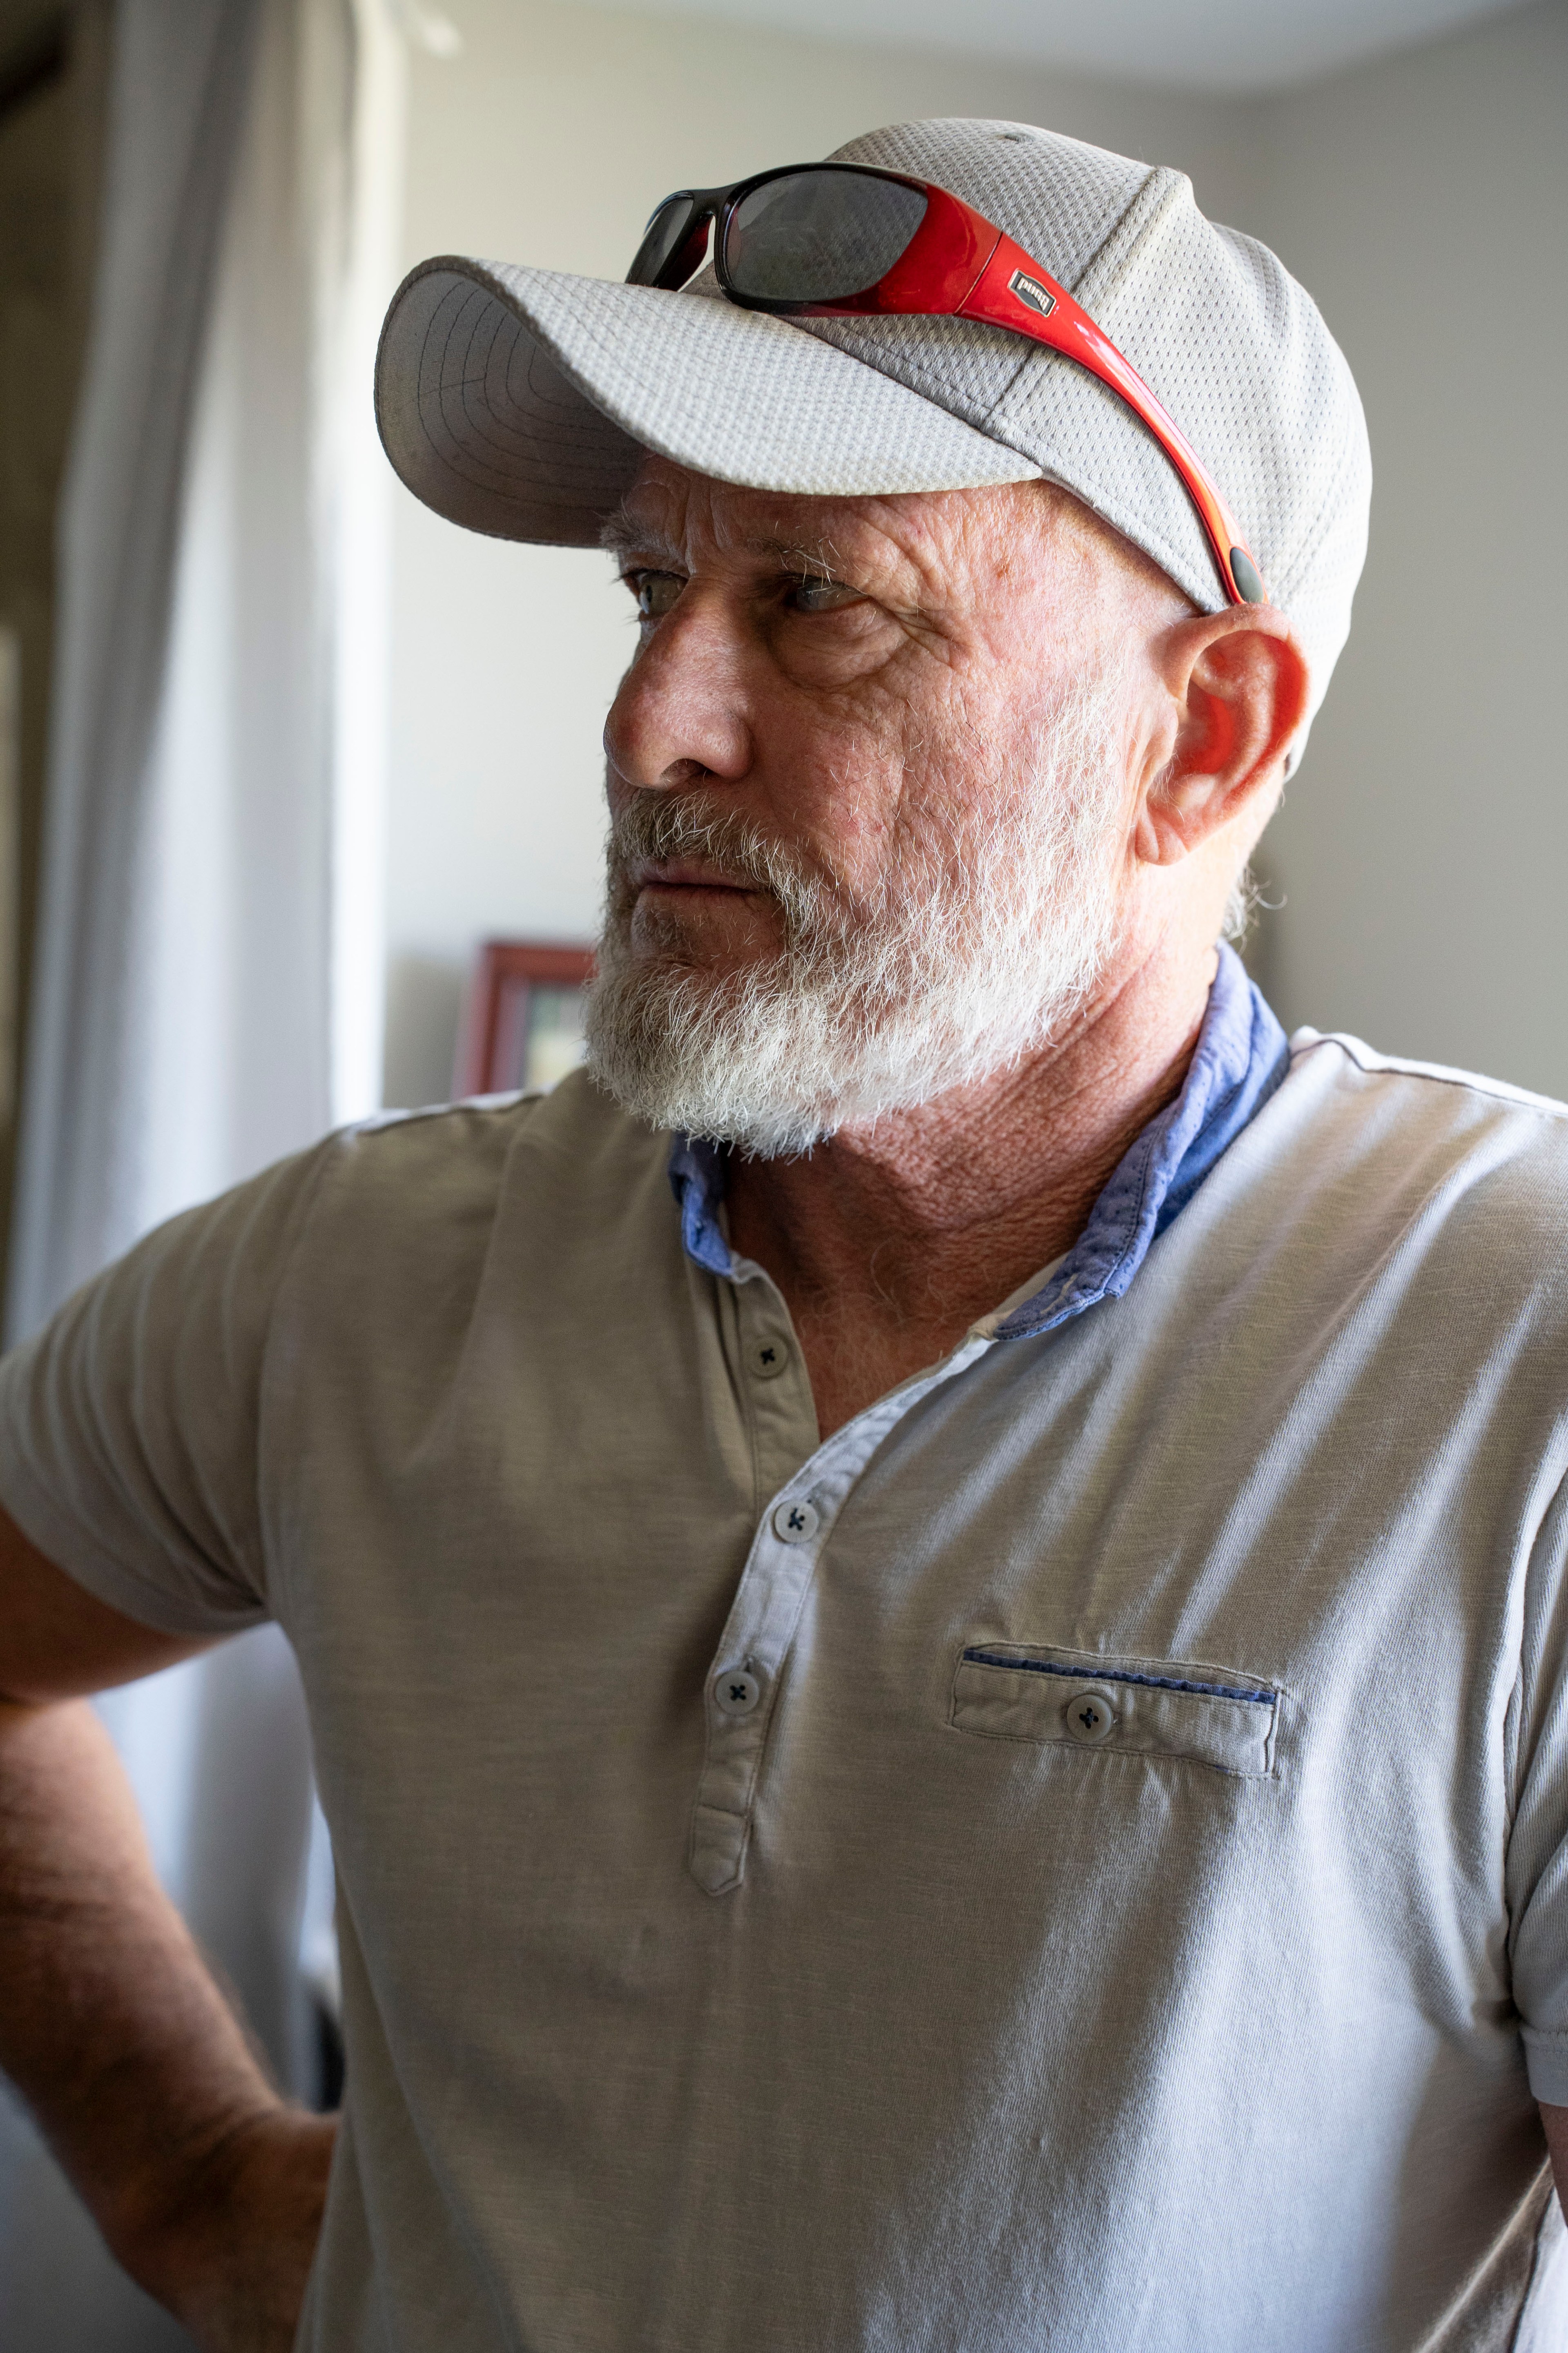 An older man with a beard wears a cap and sunglasses, looking to the side thoughtfully.